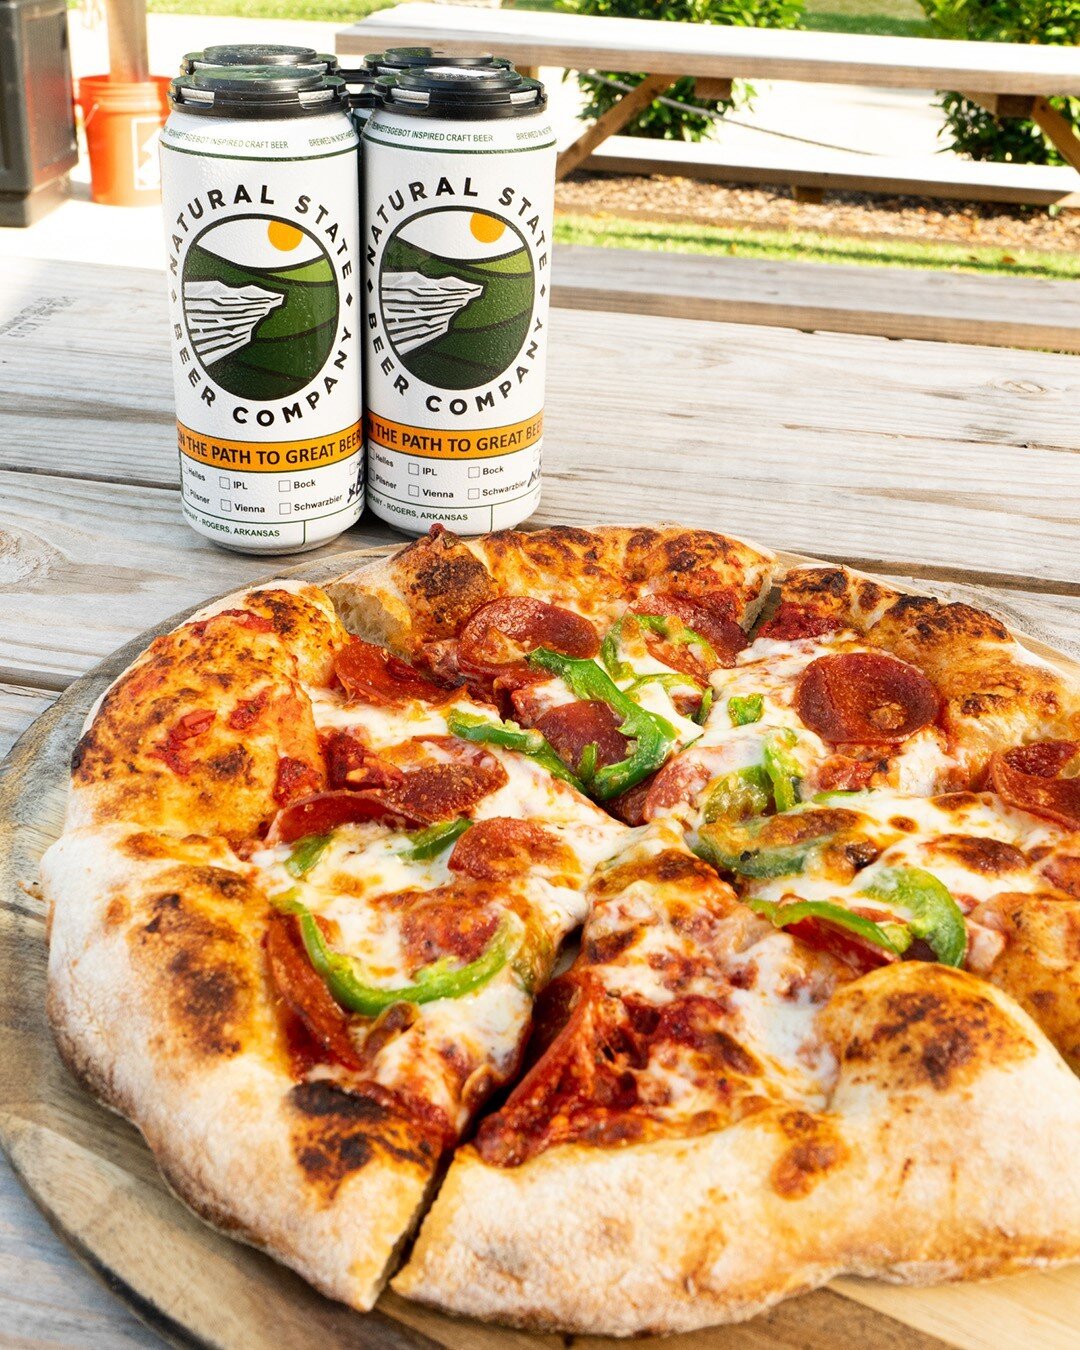 We had so much fun the last time we  we're at  Natural State Beer Company we had to go back again! 

Swing by Natural State Beer co. this Saturday from 4pm-8p for a wood-fired sourdough pizza and cold locally brewed beer.